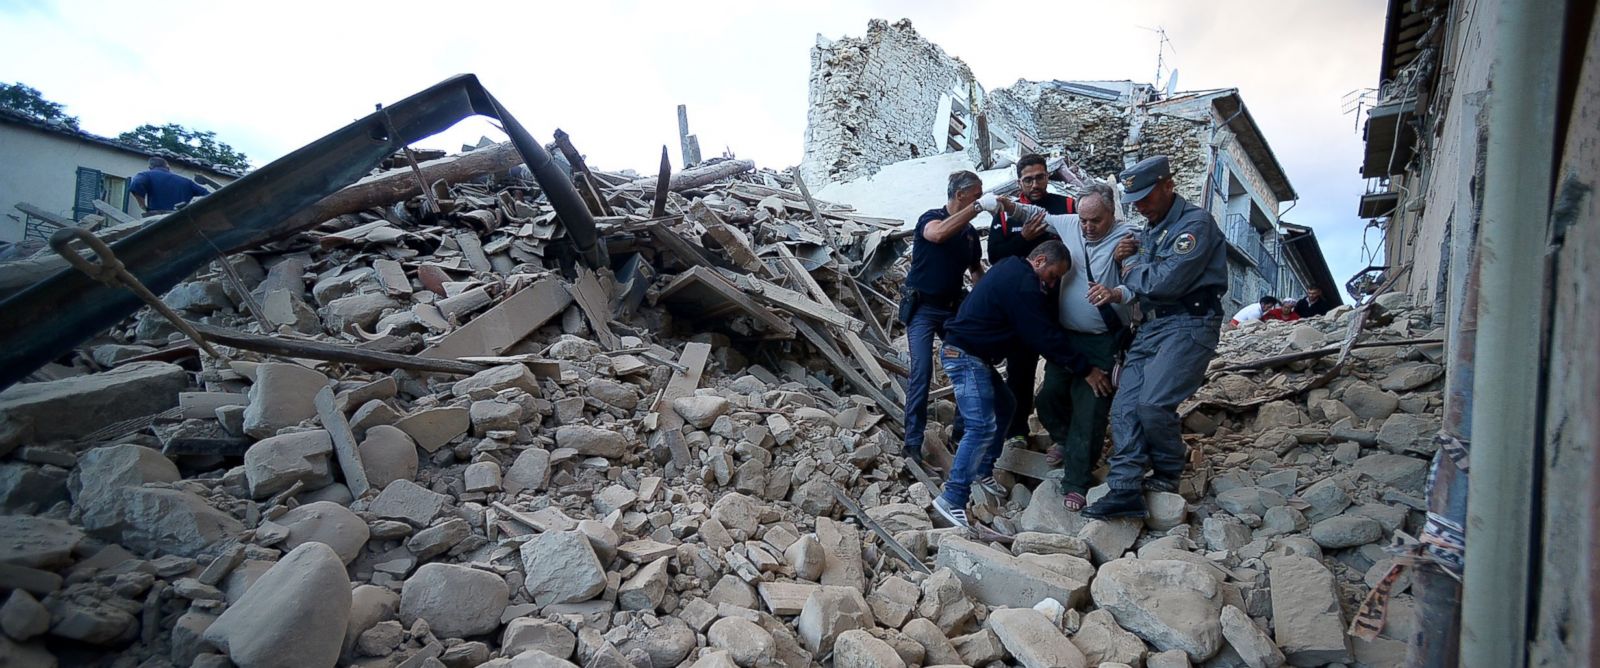 PHOTO: Residents and rescuers help a man among the rubble after a strong earthquake hit Amatrice on August 24, 2016